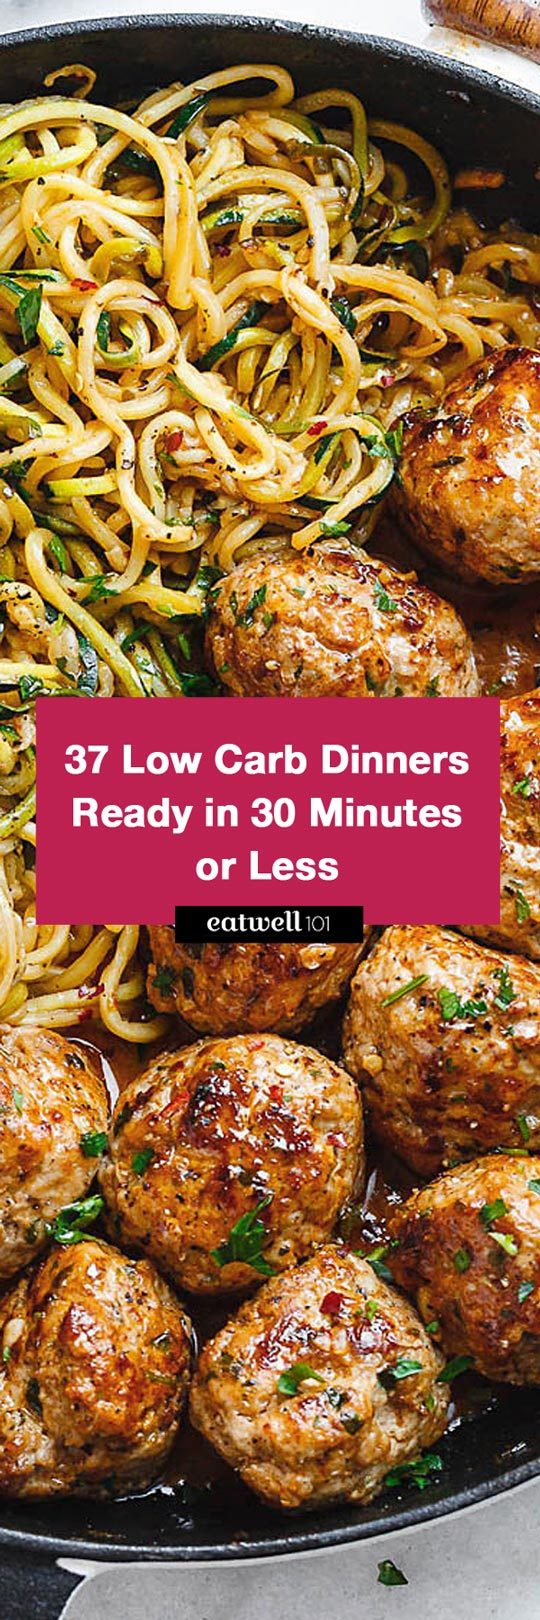 Low Carb Recipes 78 Quick Low Carb Dinners Ready in 30